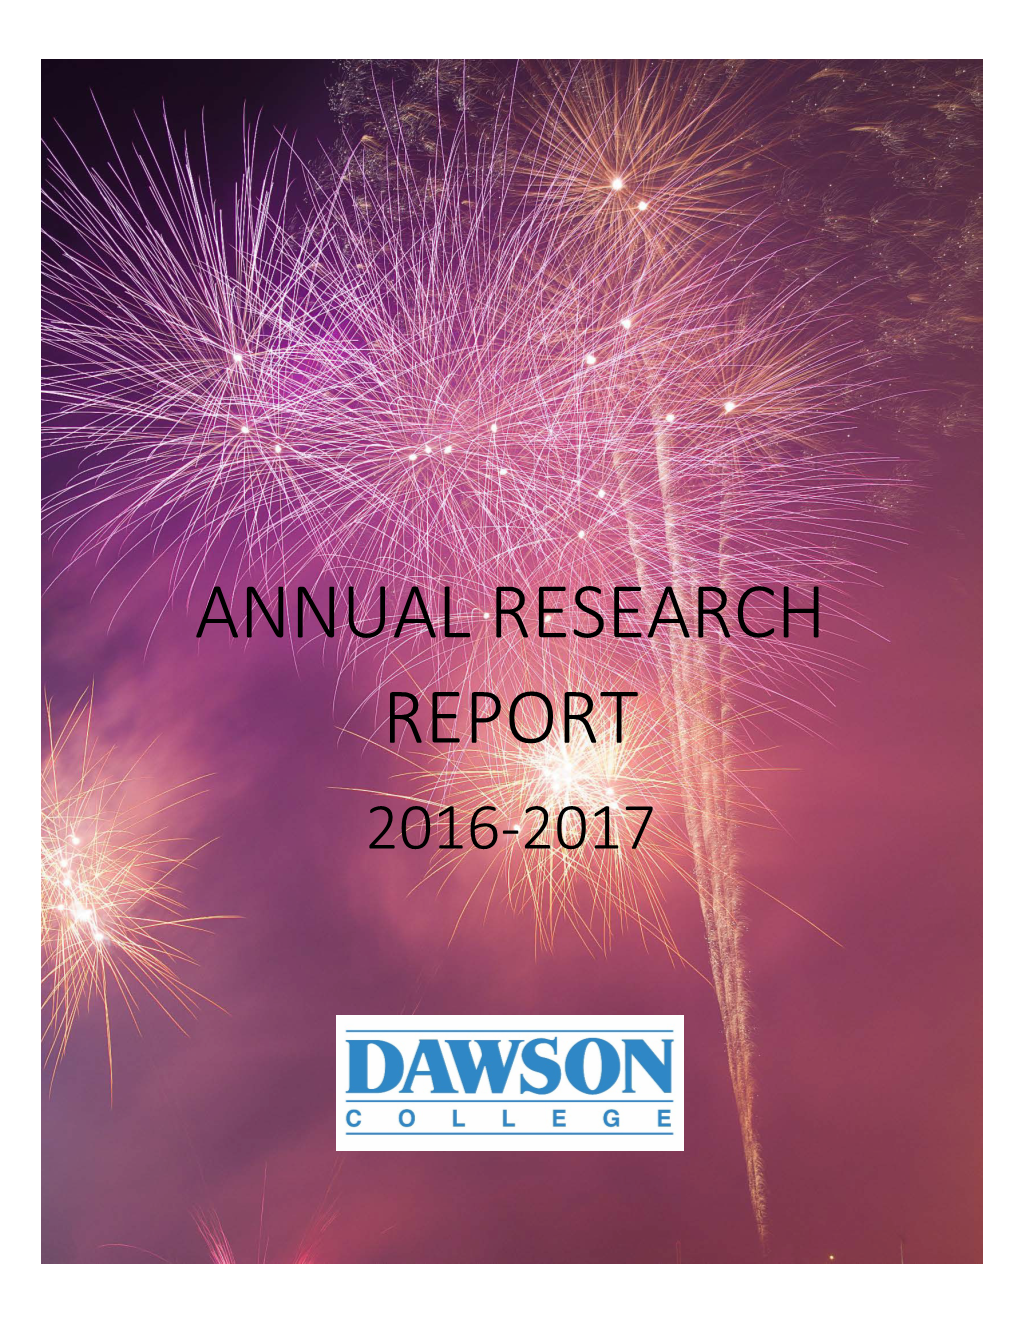 Annual Research Report 2016-2017